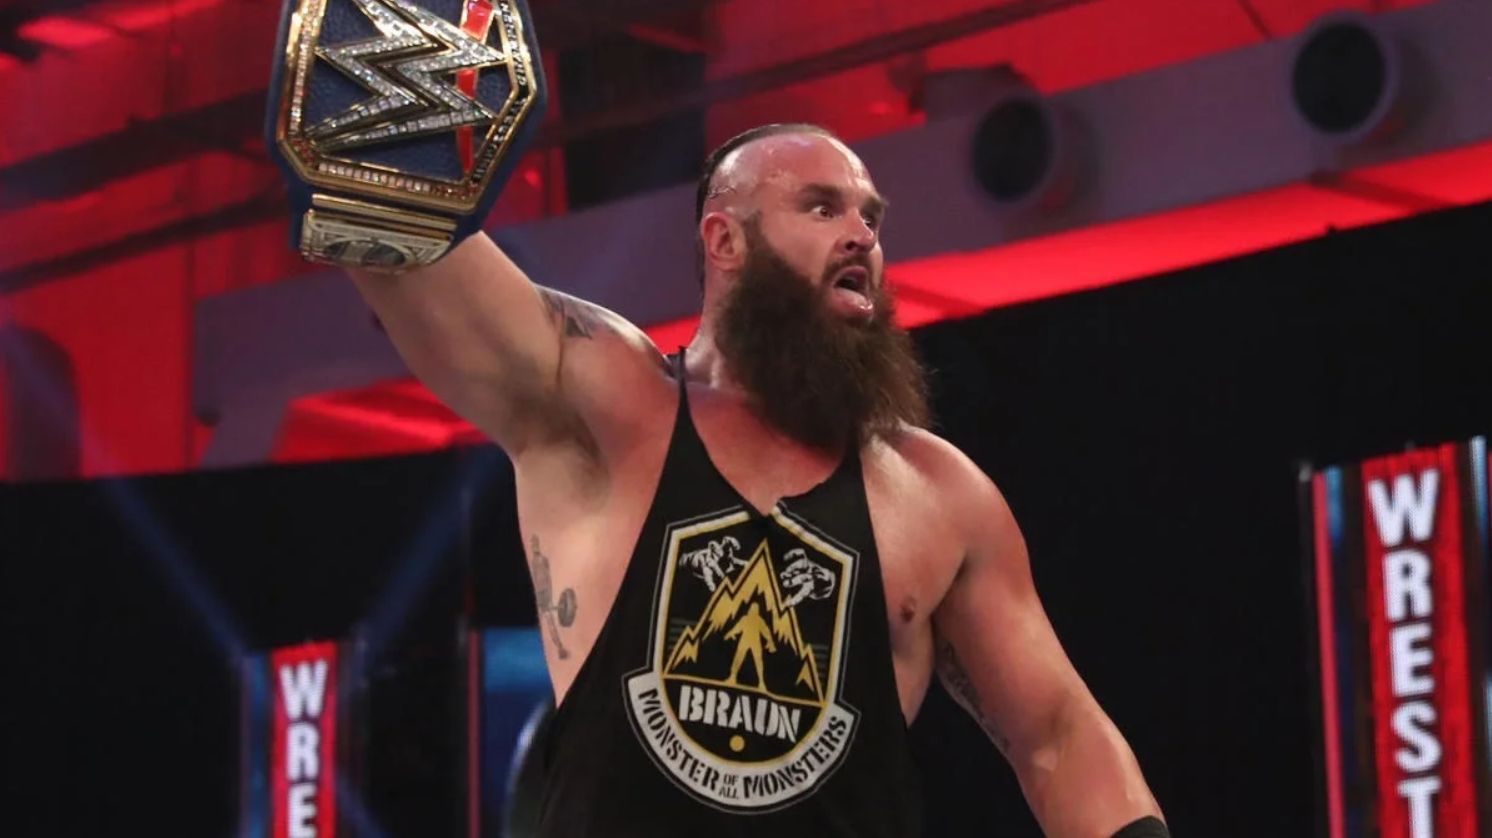 Braun Strowman holding up the WWE Universal Title at WrestleMania 36 (2020)